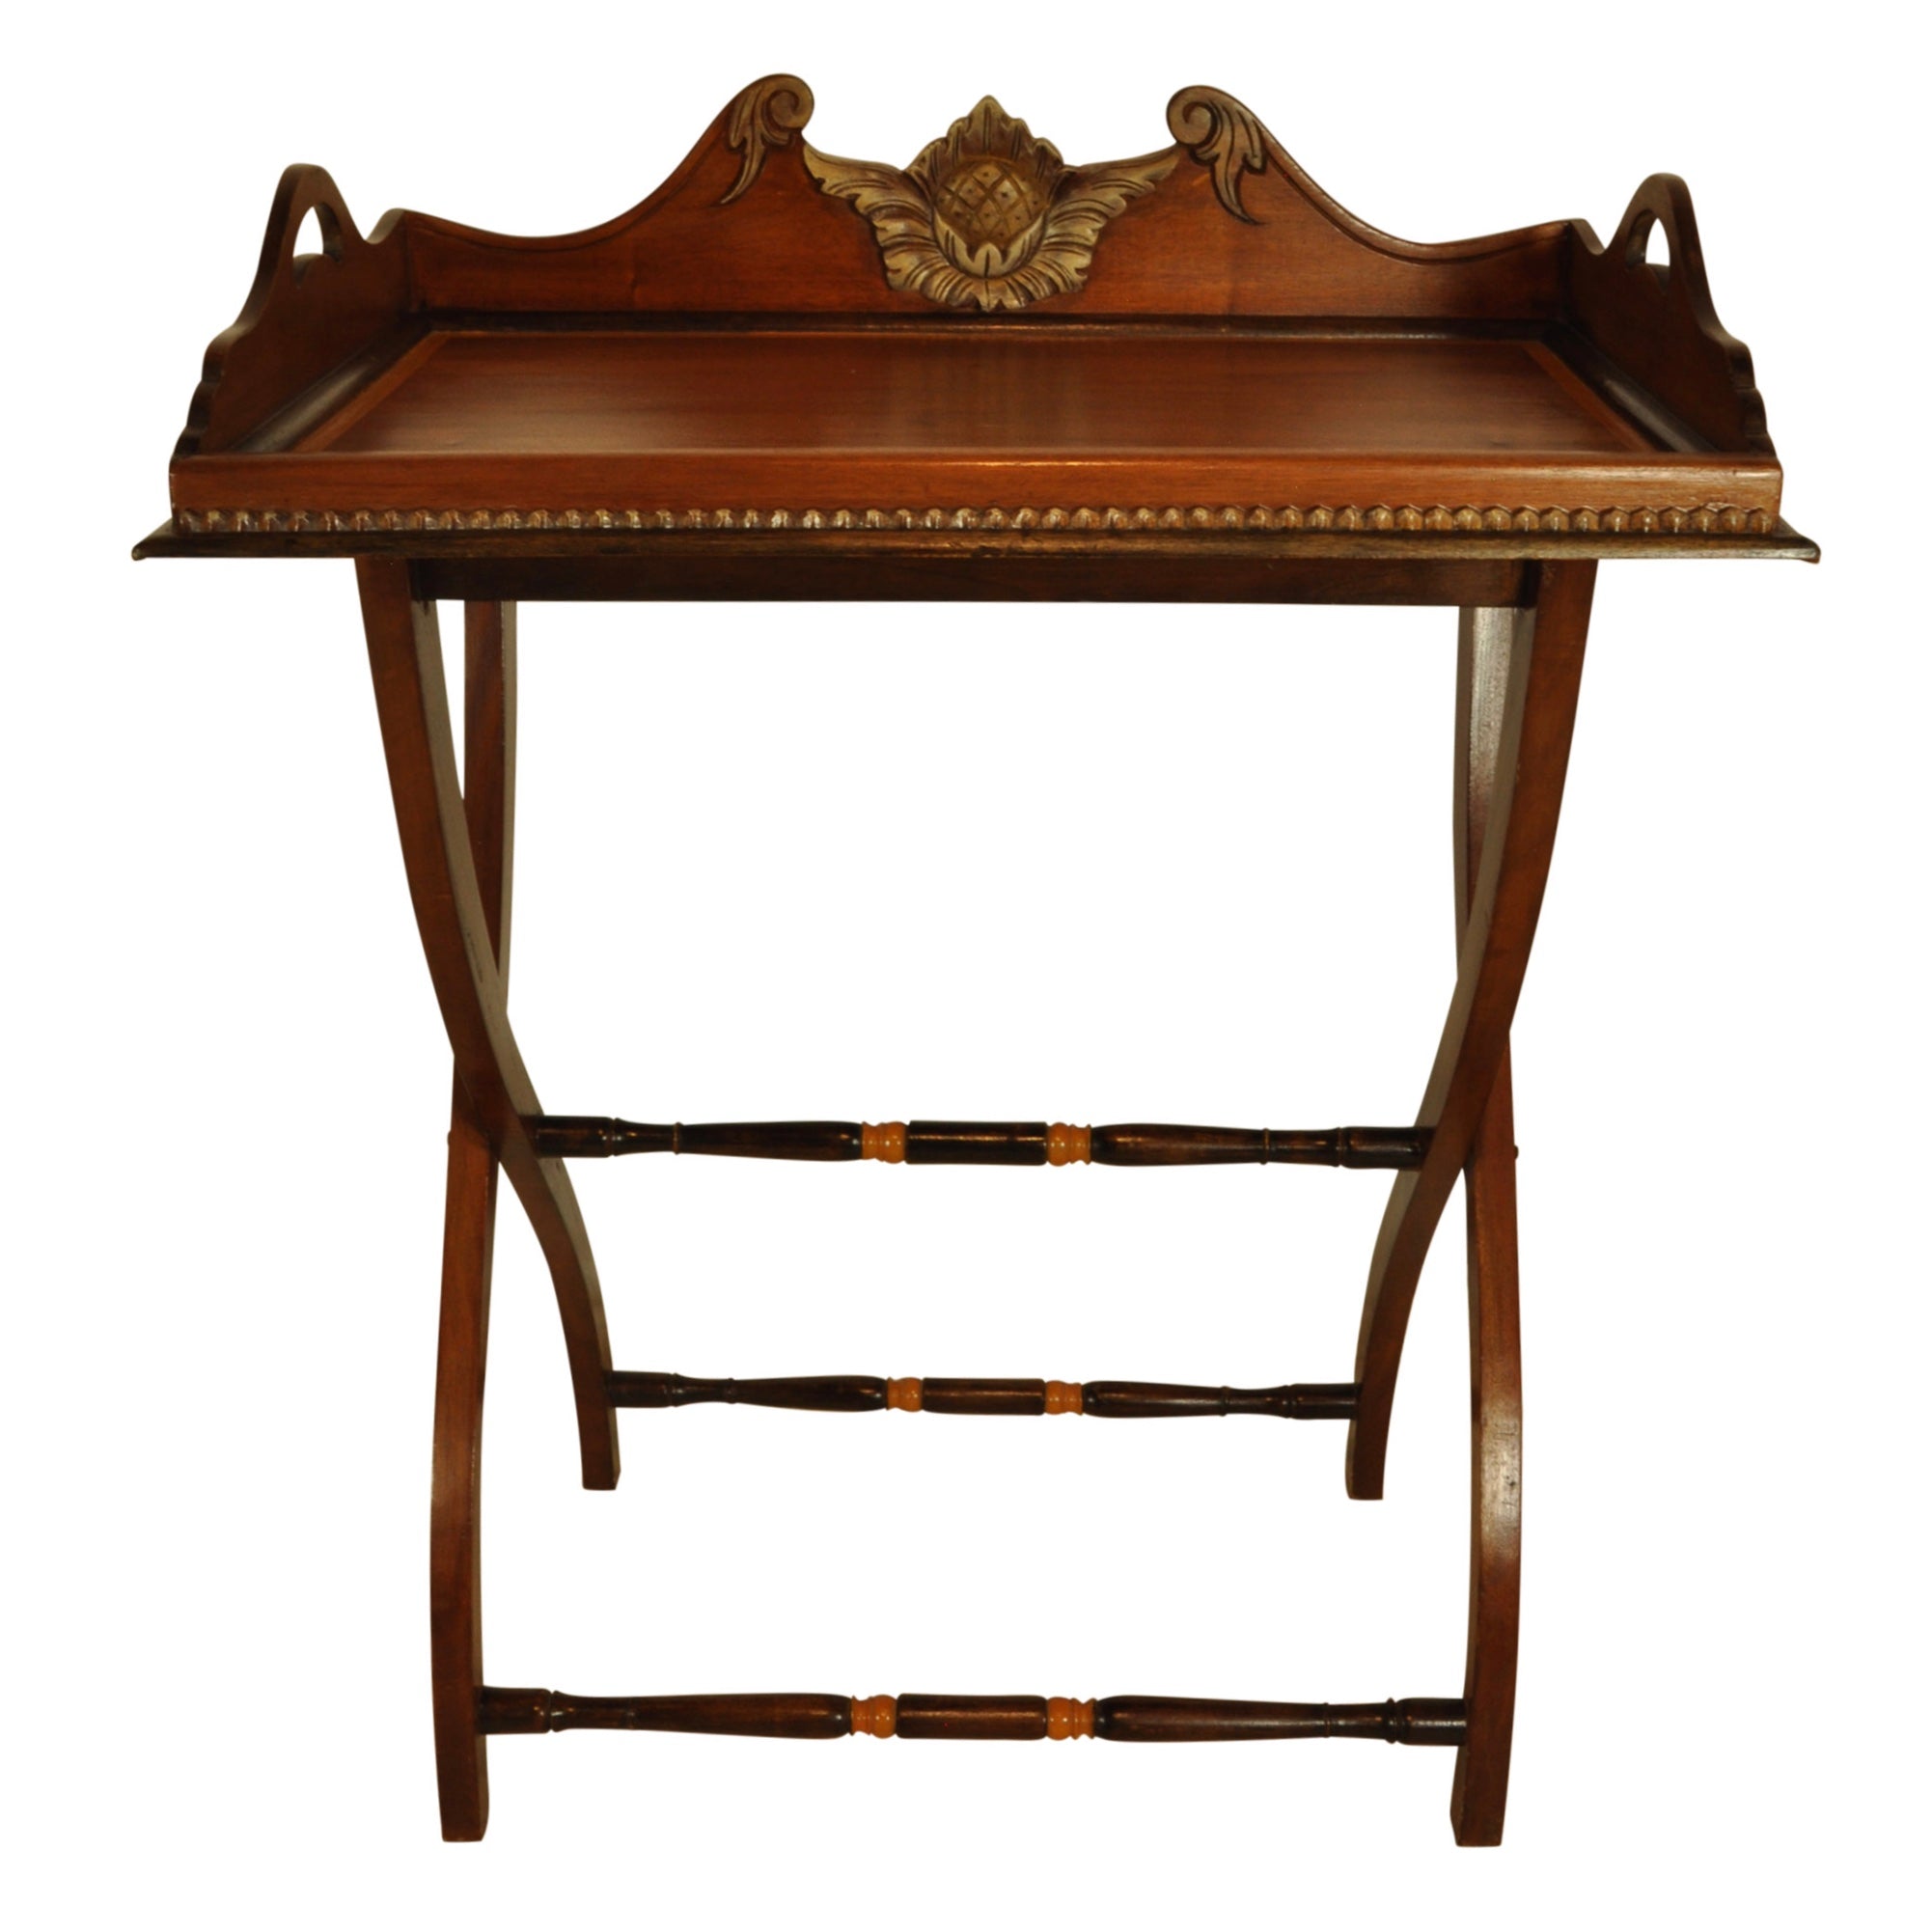 Butler's Serving Tray on Folding Stand